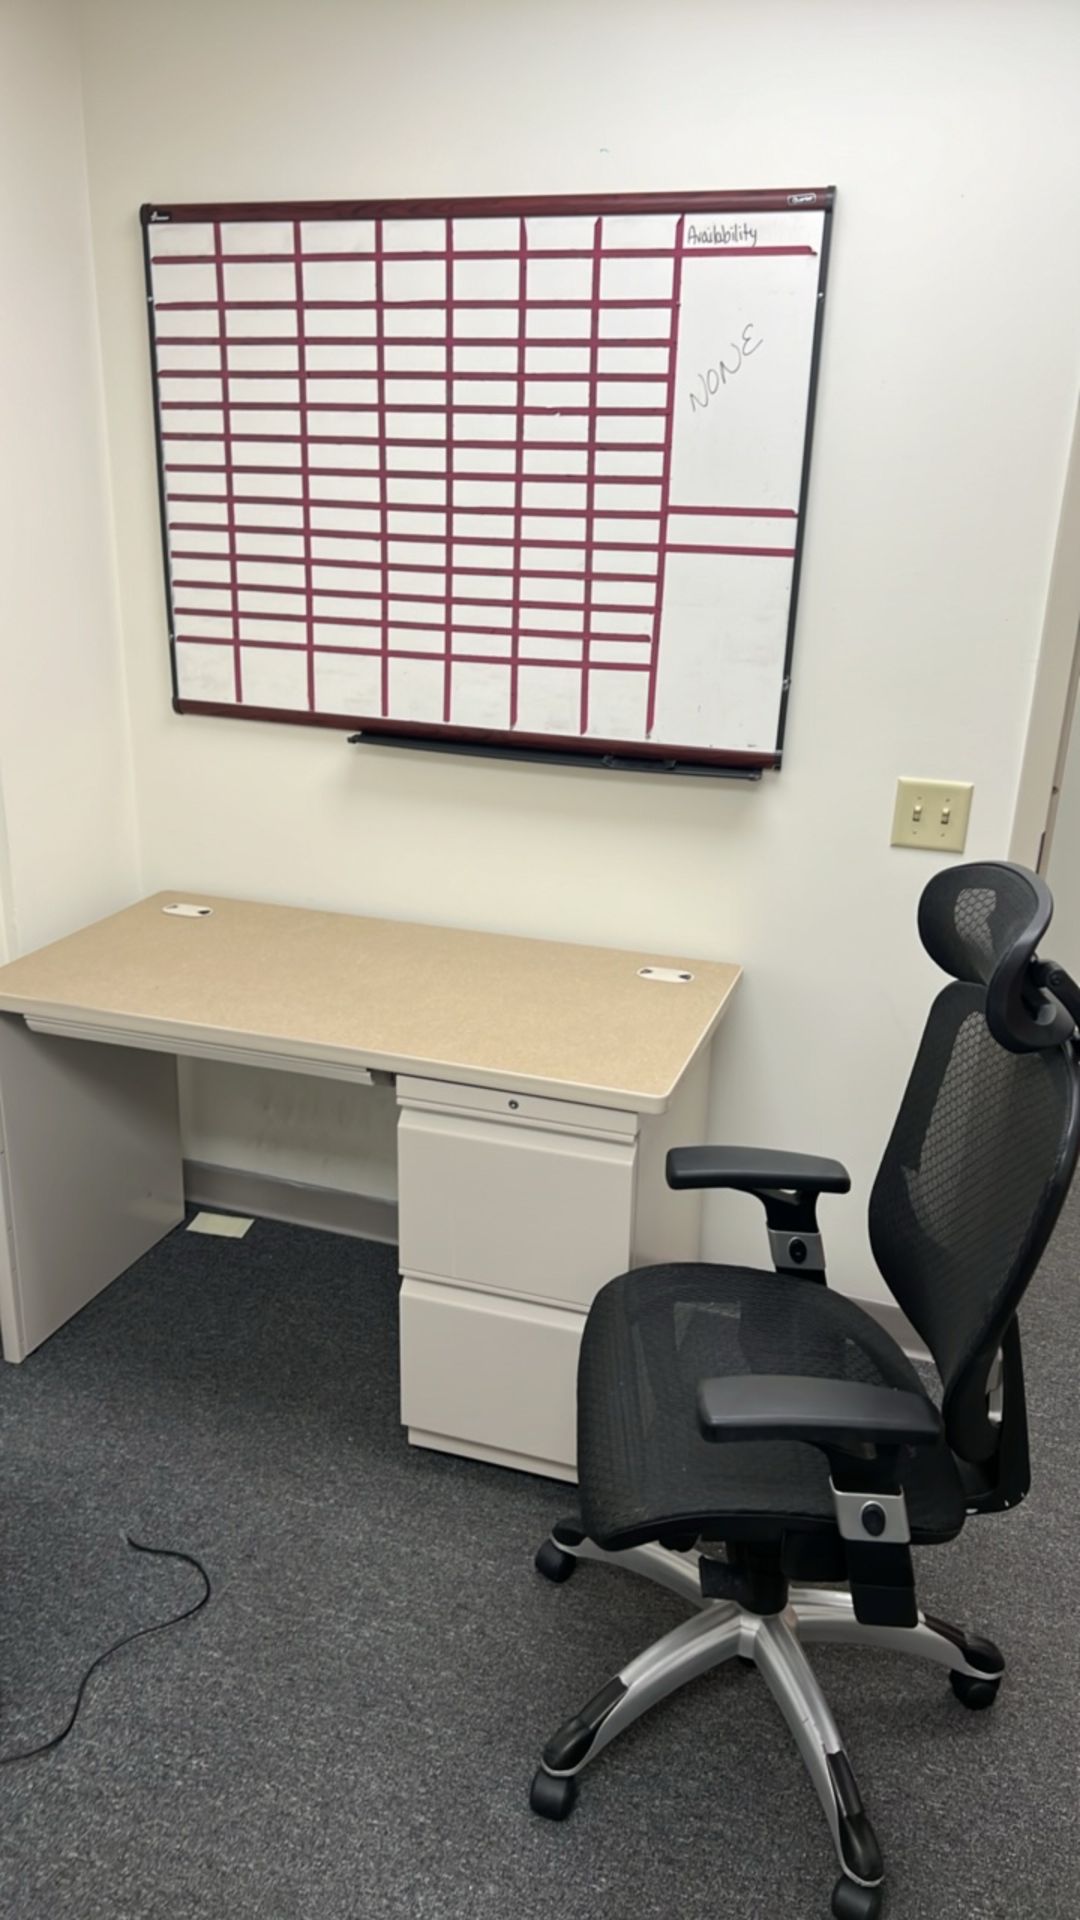 OFFICE TO INCLUDE: DESKS, CHAIRS, PHONE, FILE CABINET, WHITE BOARD - Image 3 of 6